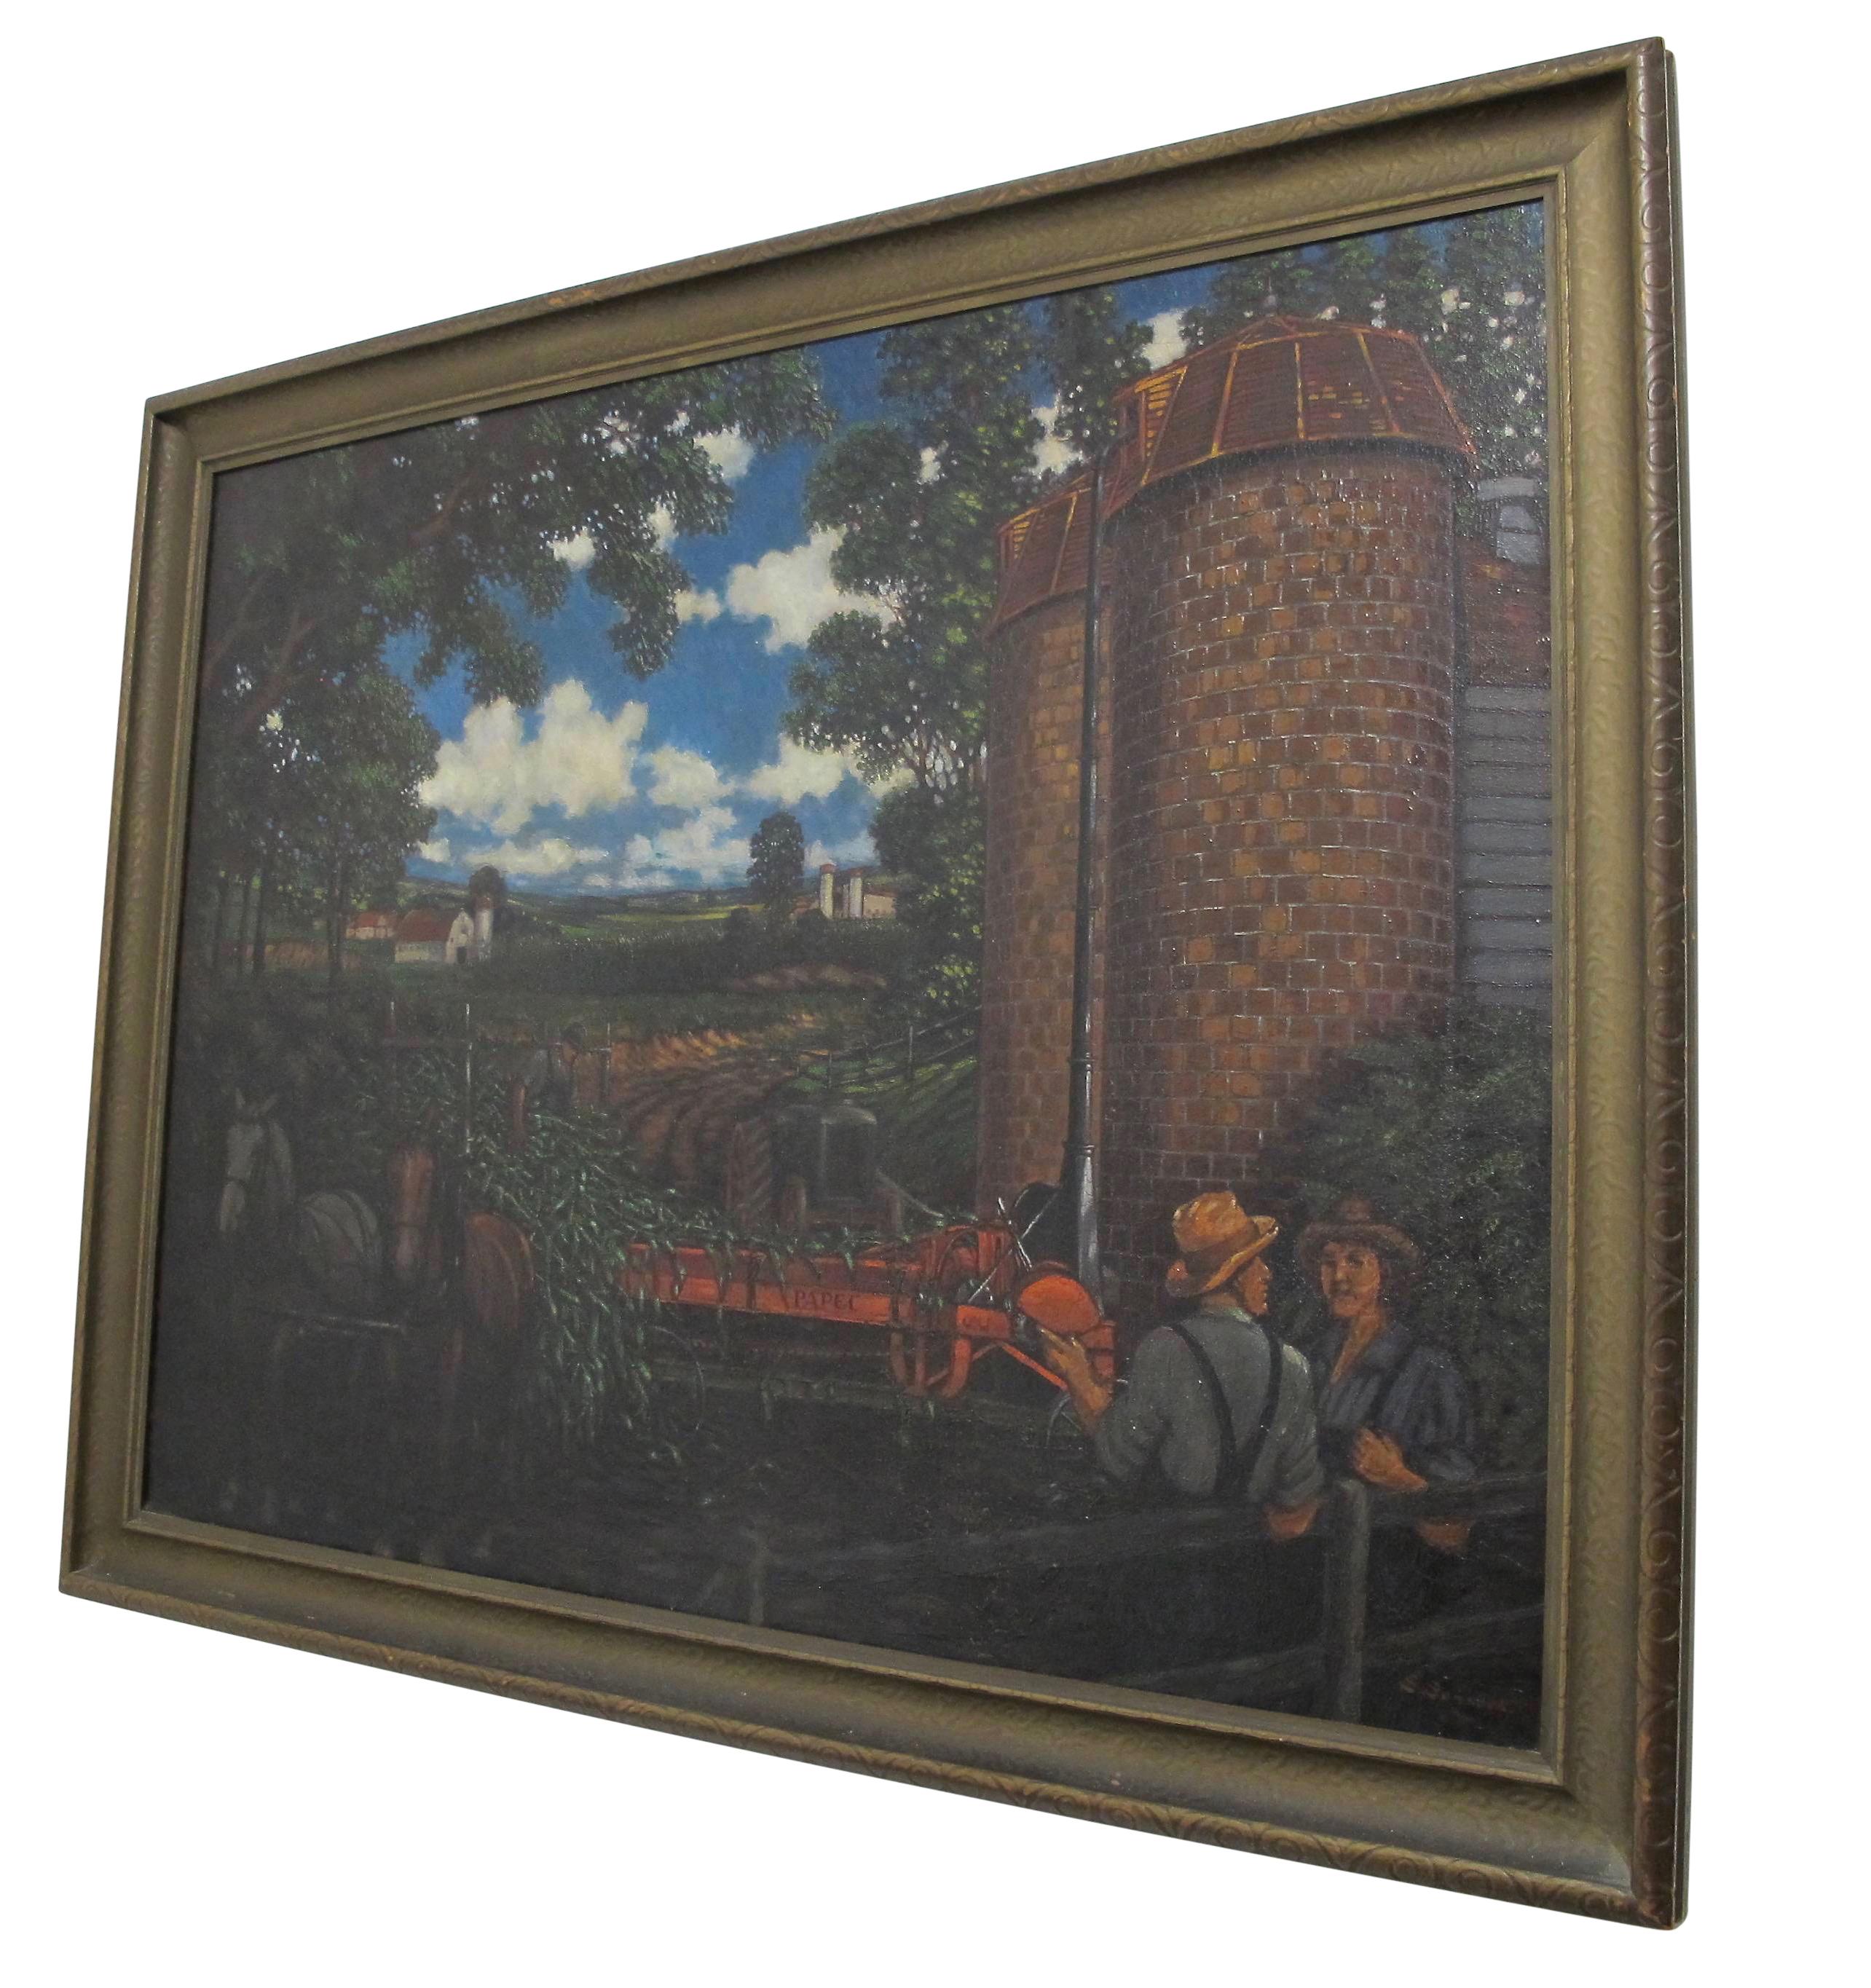 A very large pastoral farm scene (most likely New York) in a simple but original frame. Oil on canvas, signed Sonneck. American, first half of the 20th century.